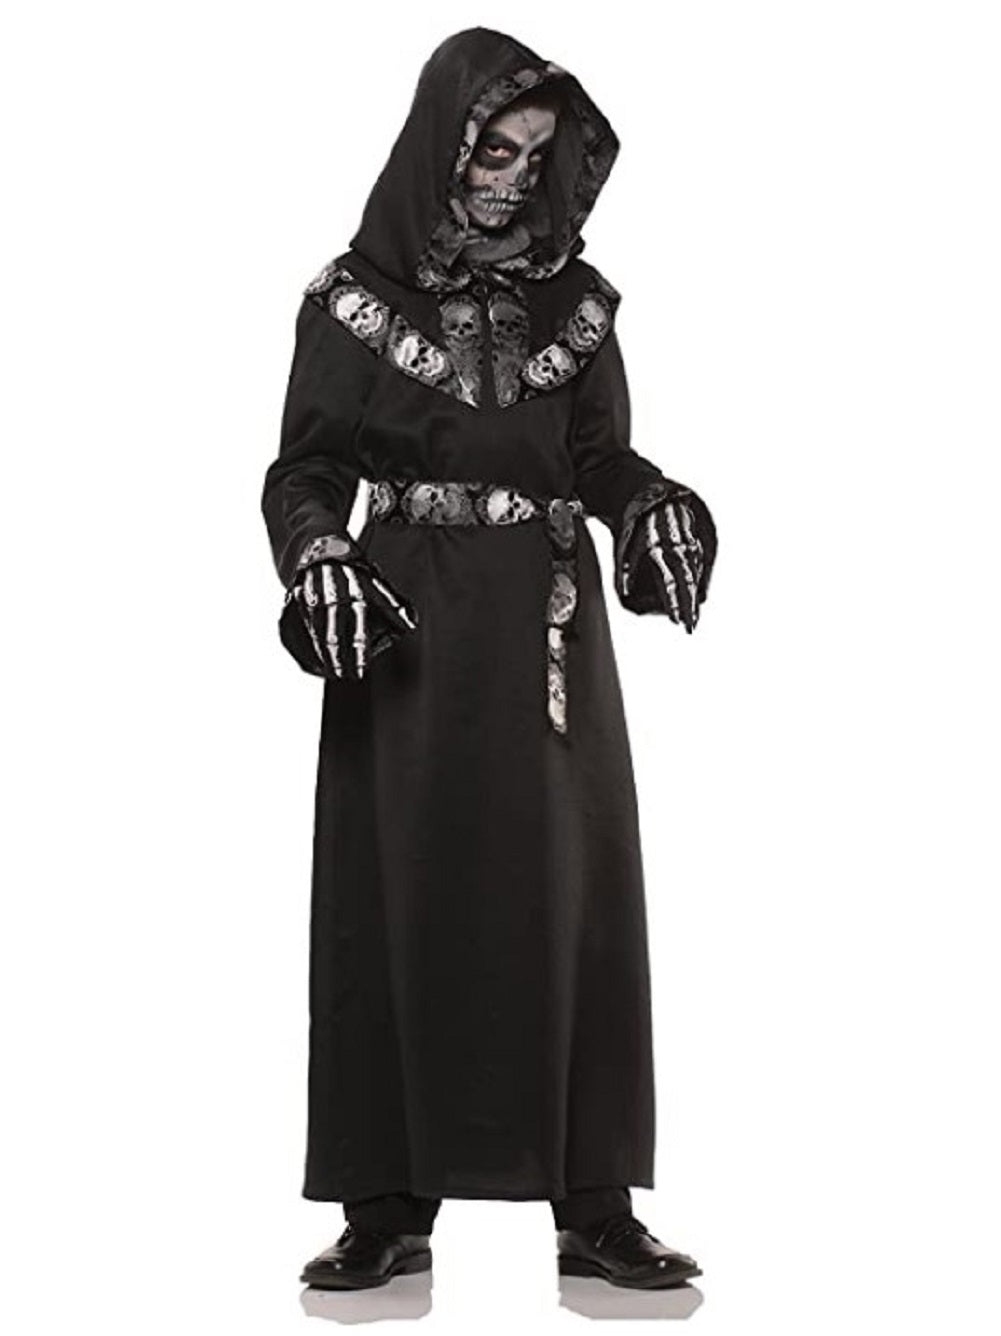 Crypt Keeper Skull Master Robe - Scary - Horror - Costume - Adult - 2 Sizes